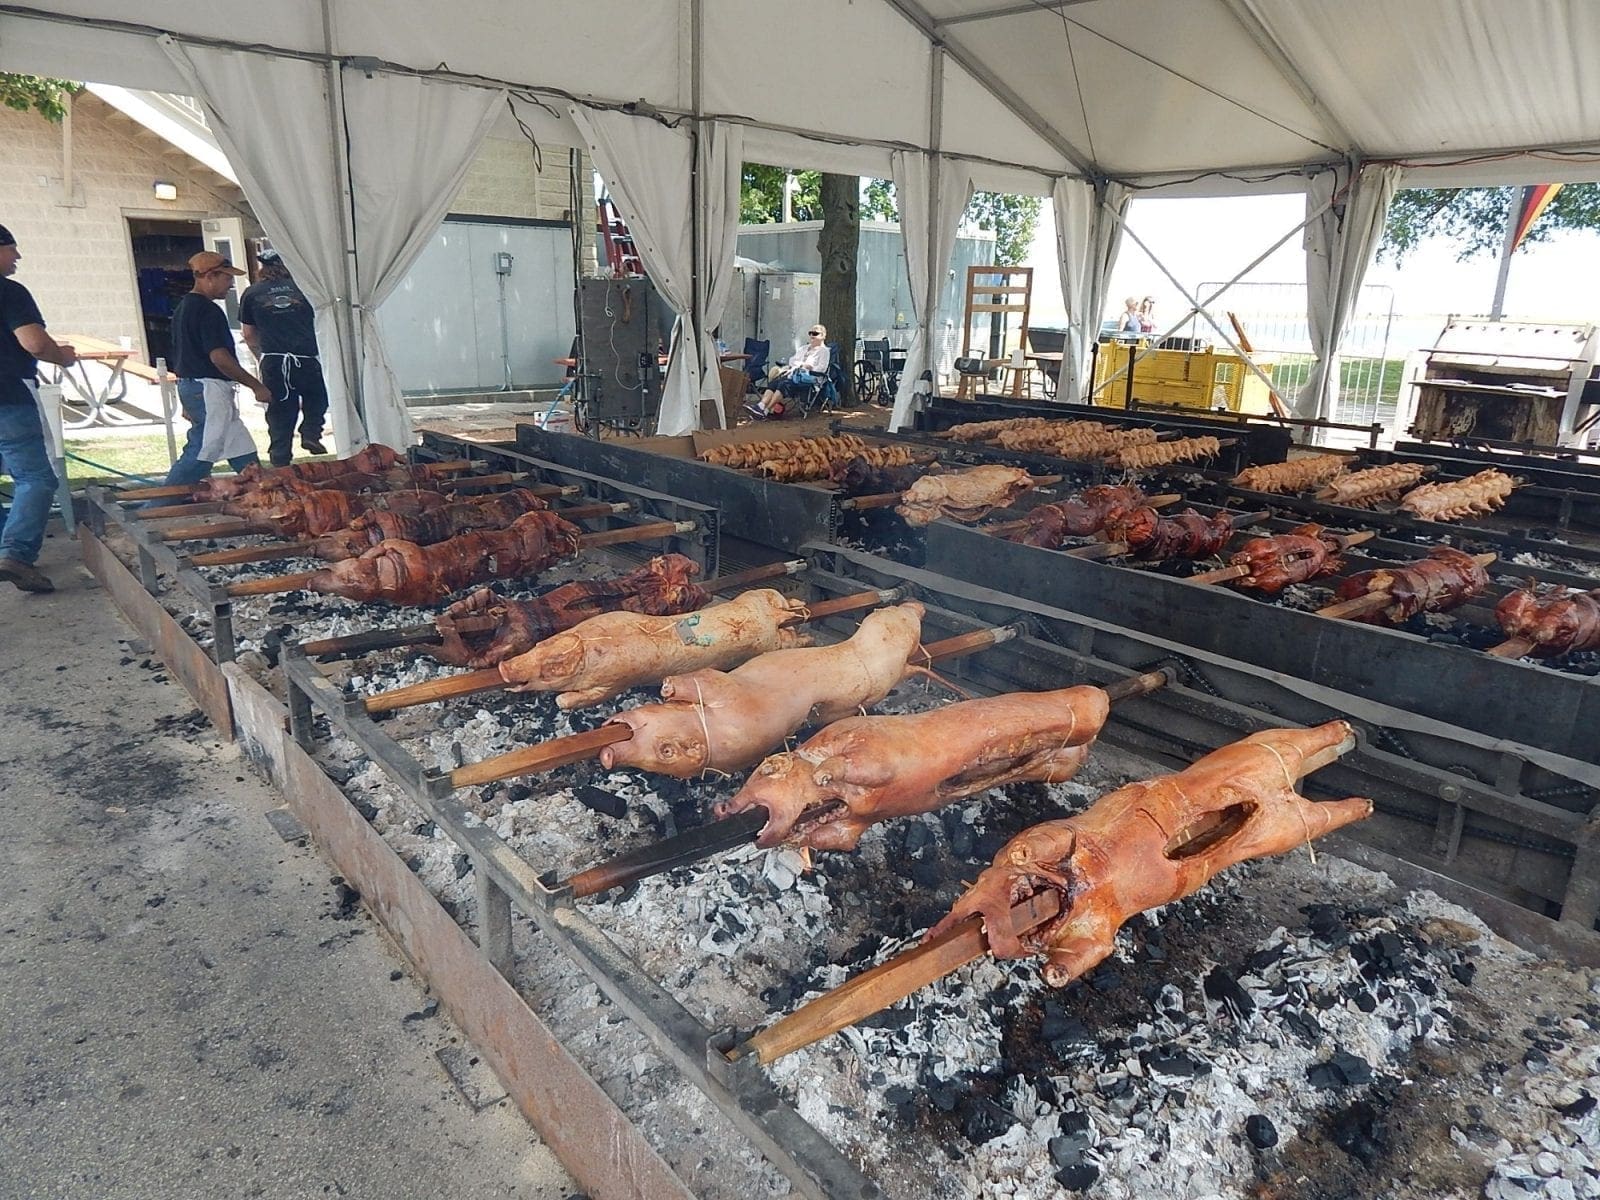 What is Spanferkel? A Roasted Pig, Perfect for German Festivals!